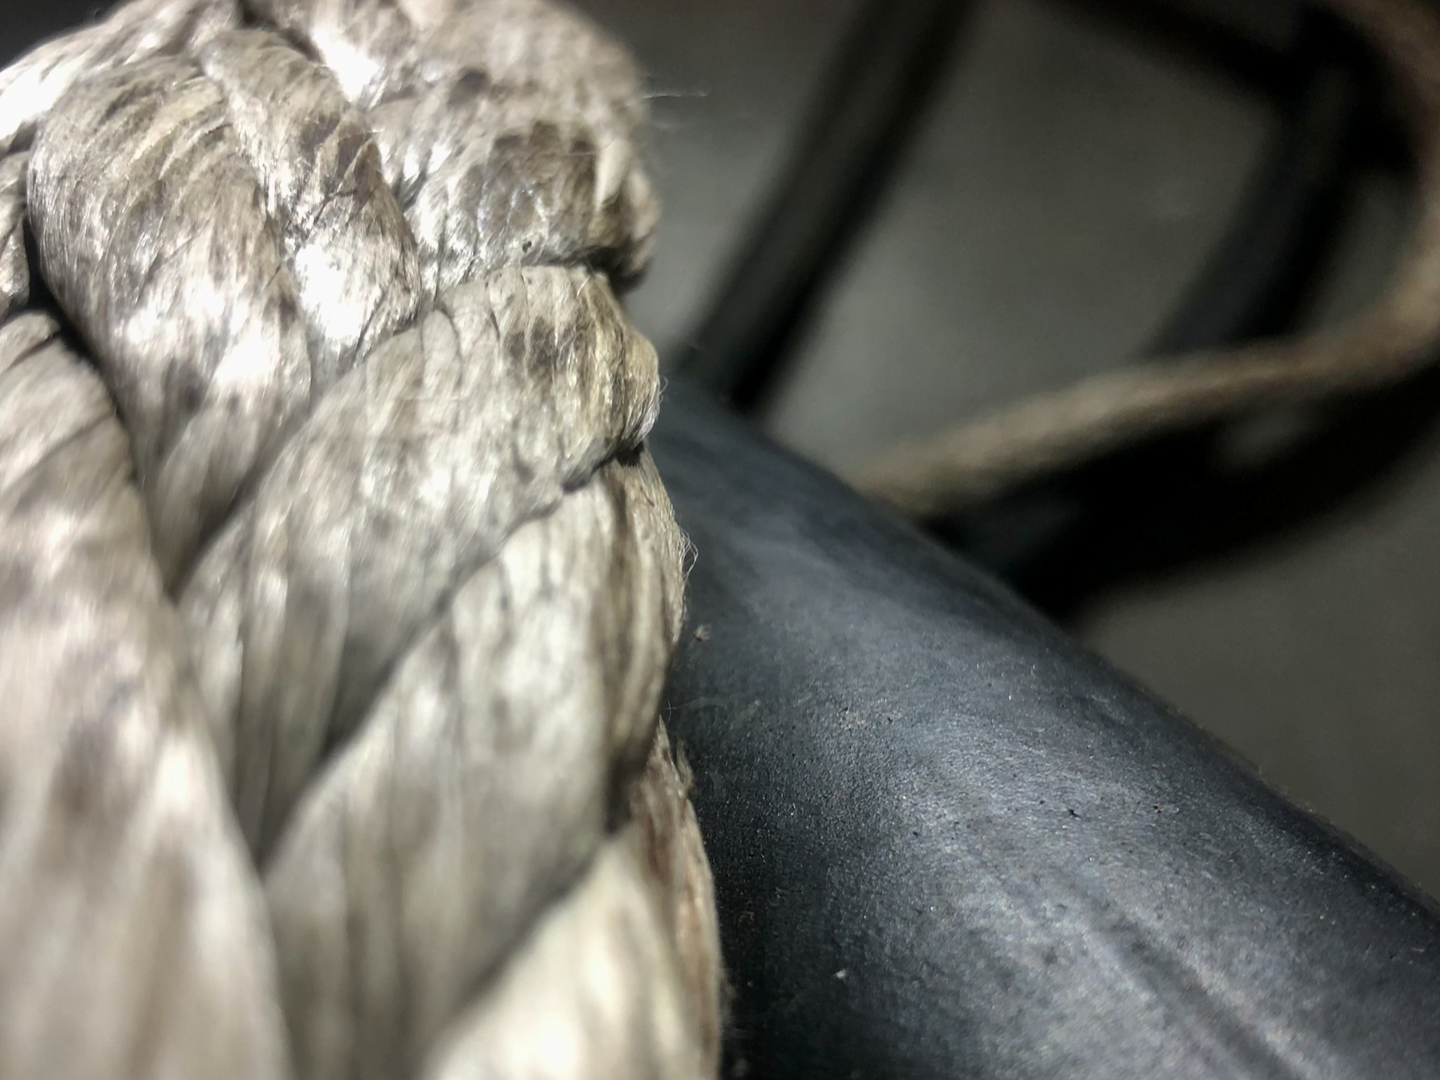 A close up image of a mooring rope and electric cable